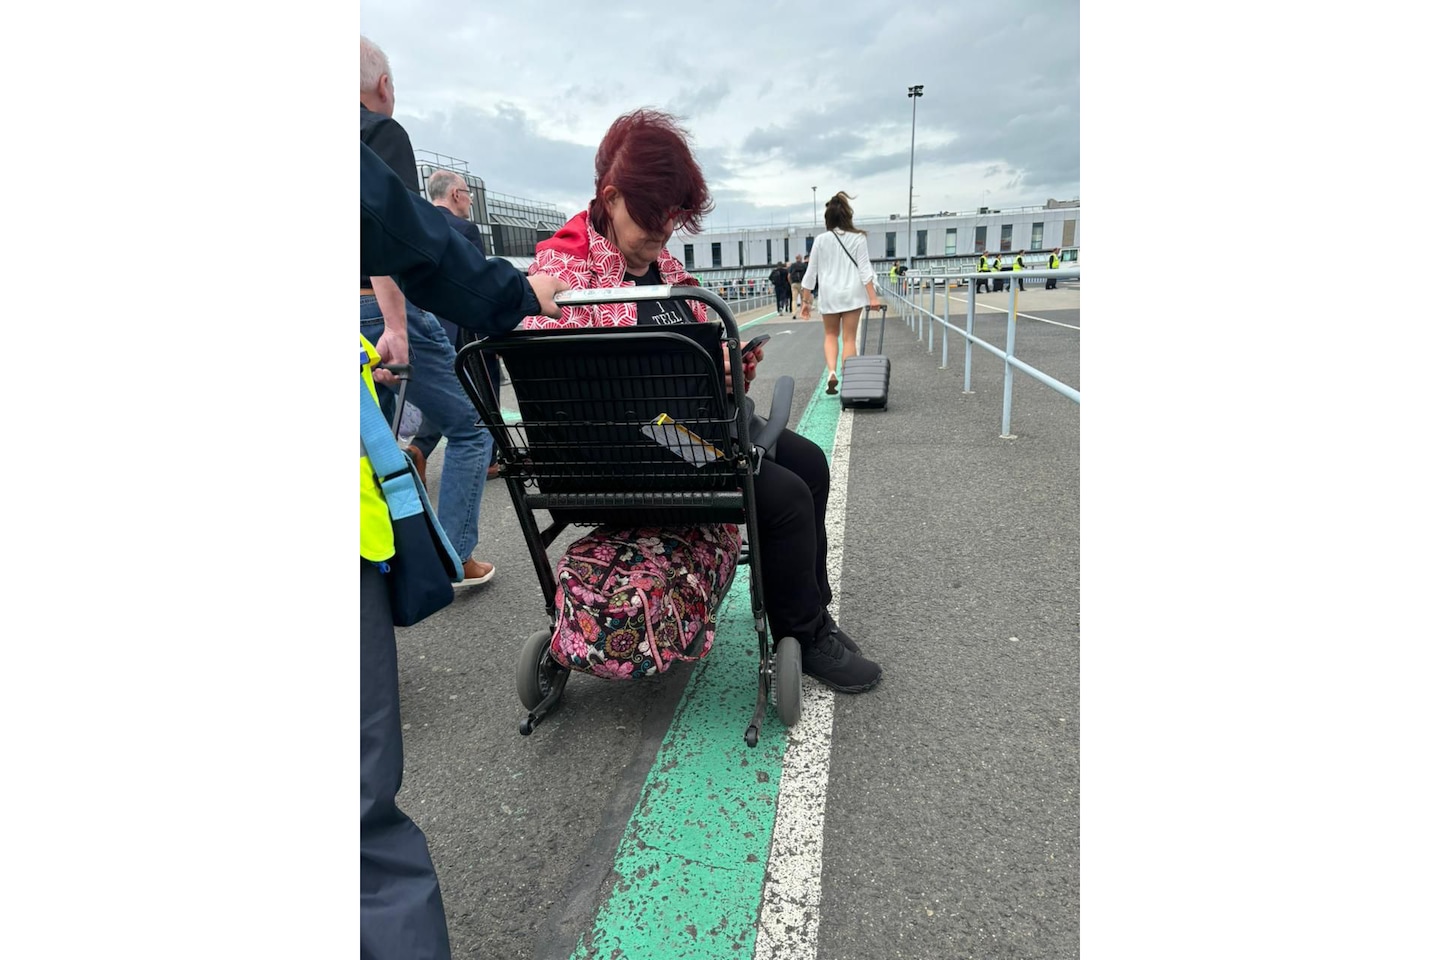 Wheelchair user left on tarmac after EasyJet flight leaves without her